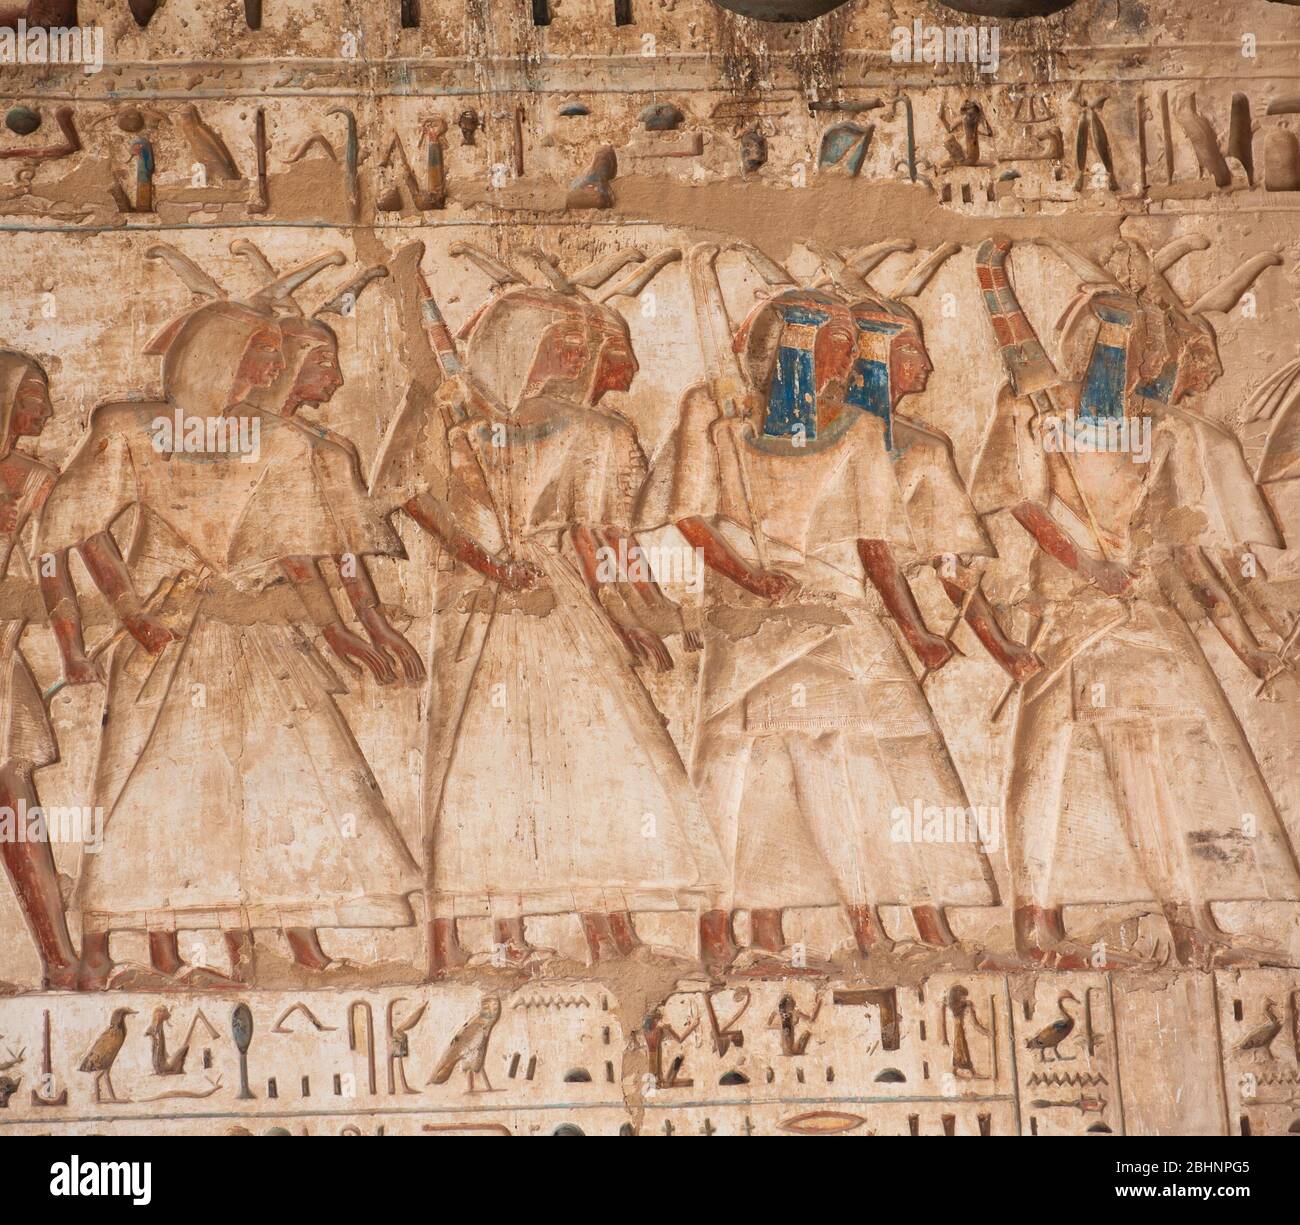 Hieroglypic carving painting on wall at the ancient egyptian temple of Medinat Habu in Luxor Stock Photo